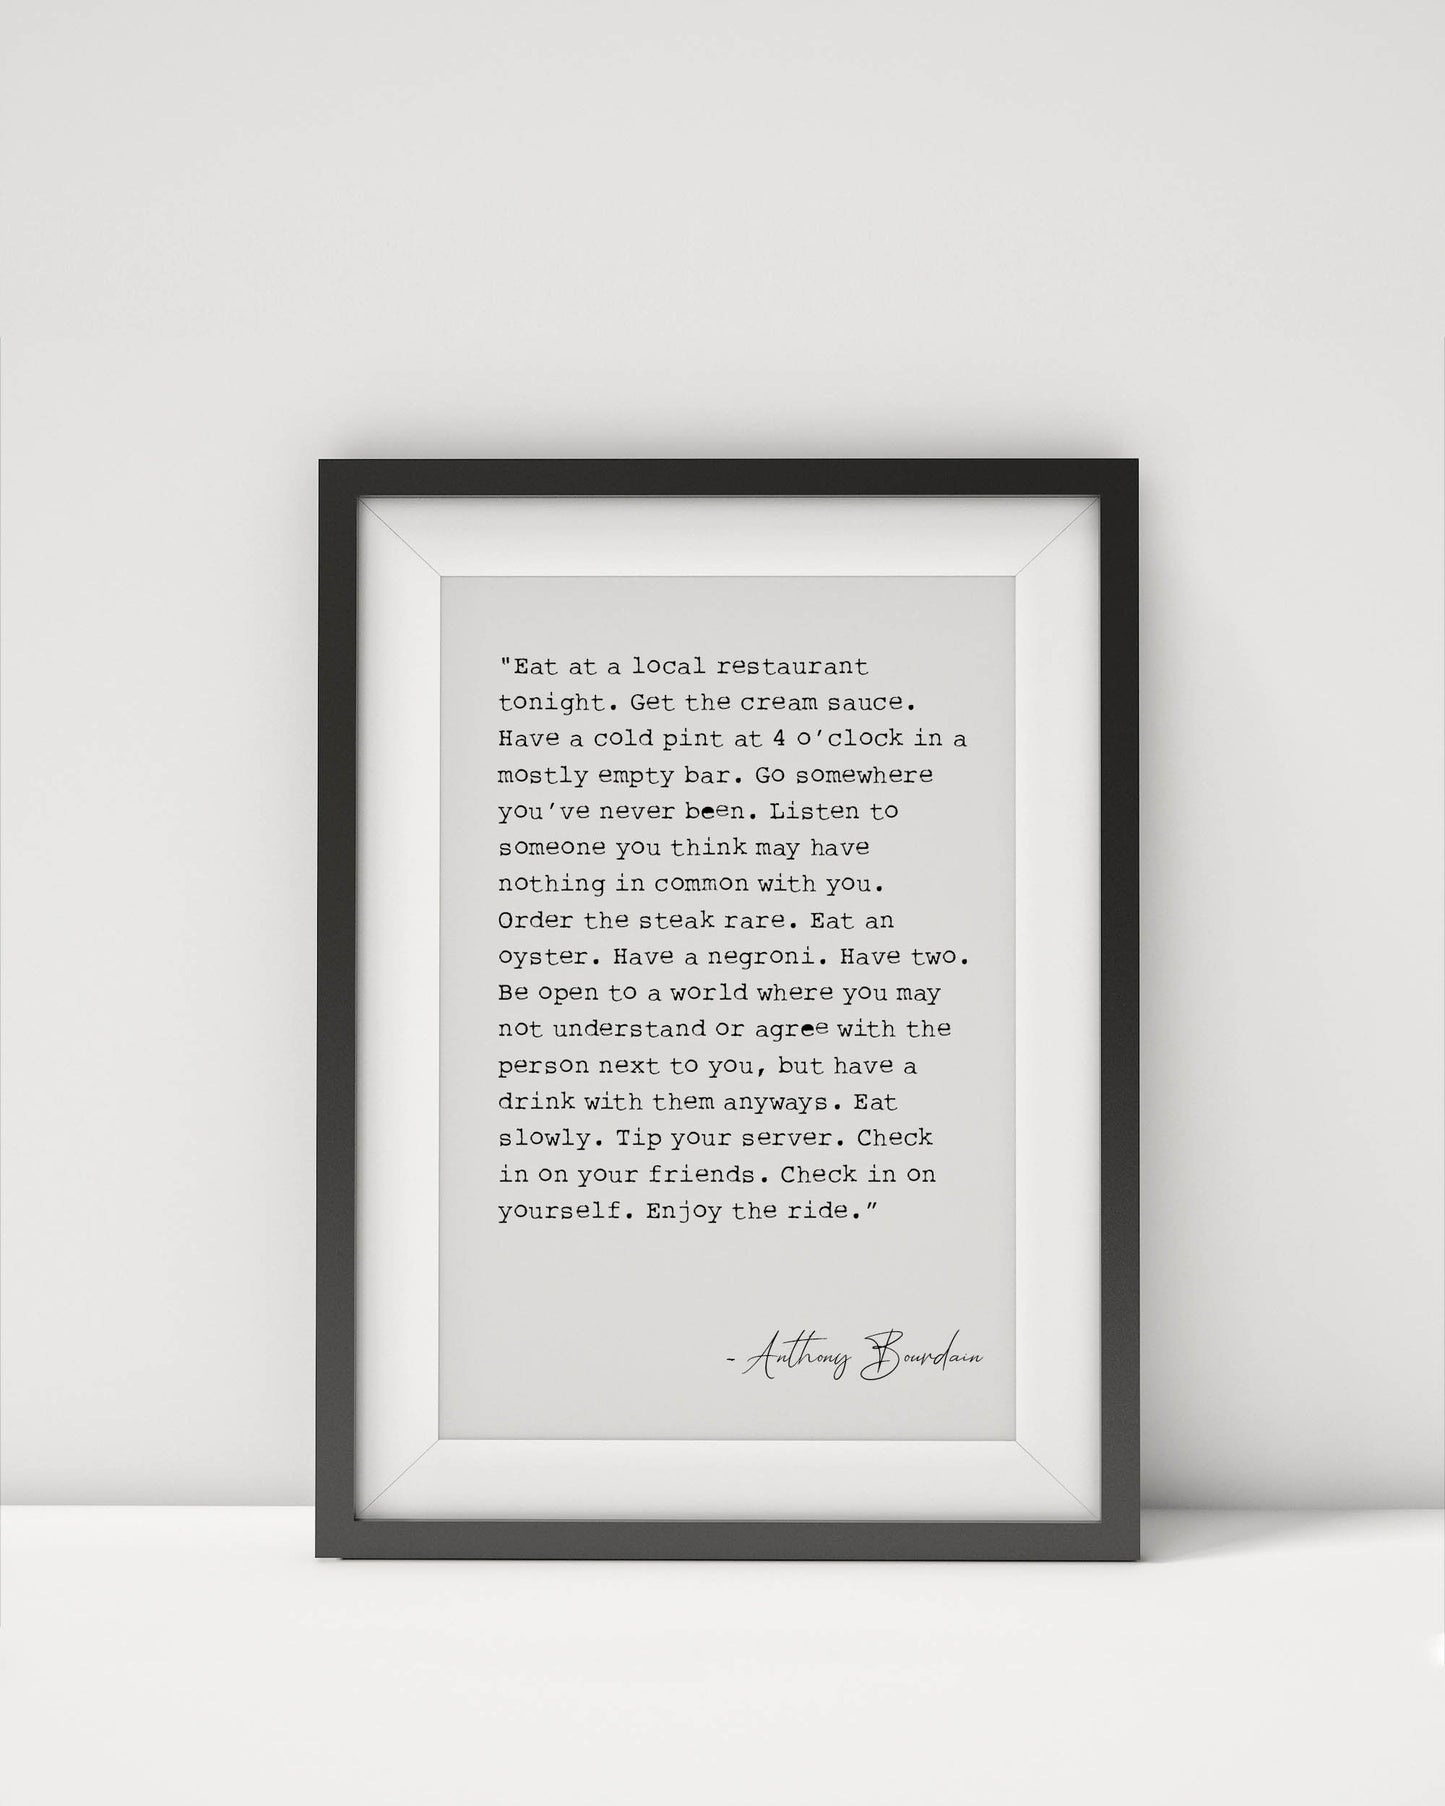 Anthony Bourdain Quote, Framed Art print, Eat at a local restaurant tonight, inspirational art print poster quote